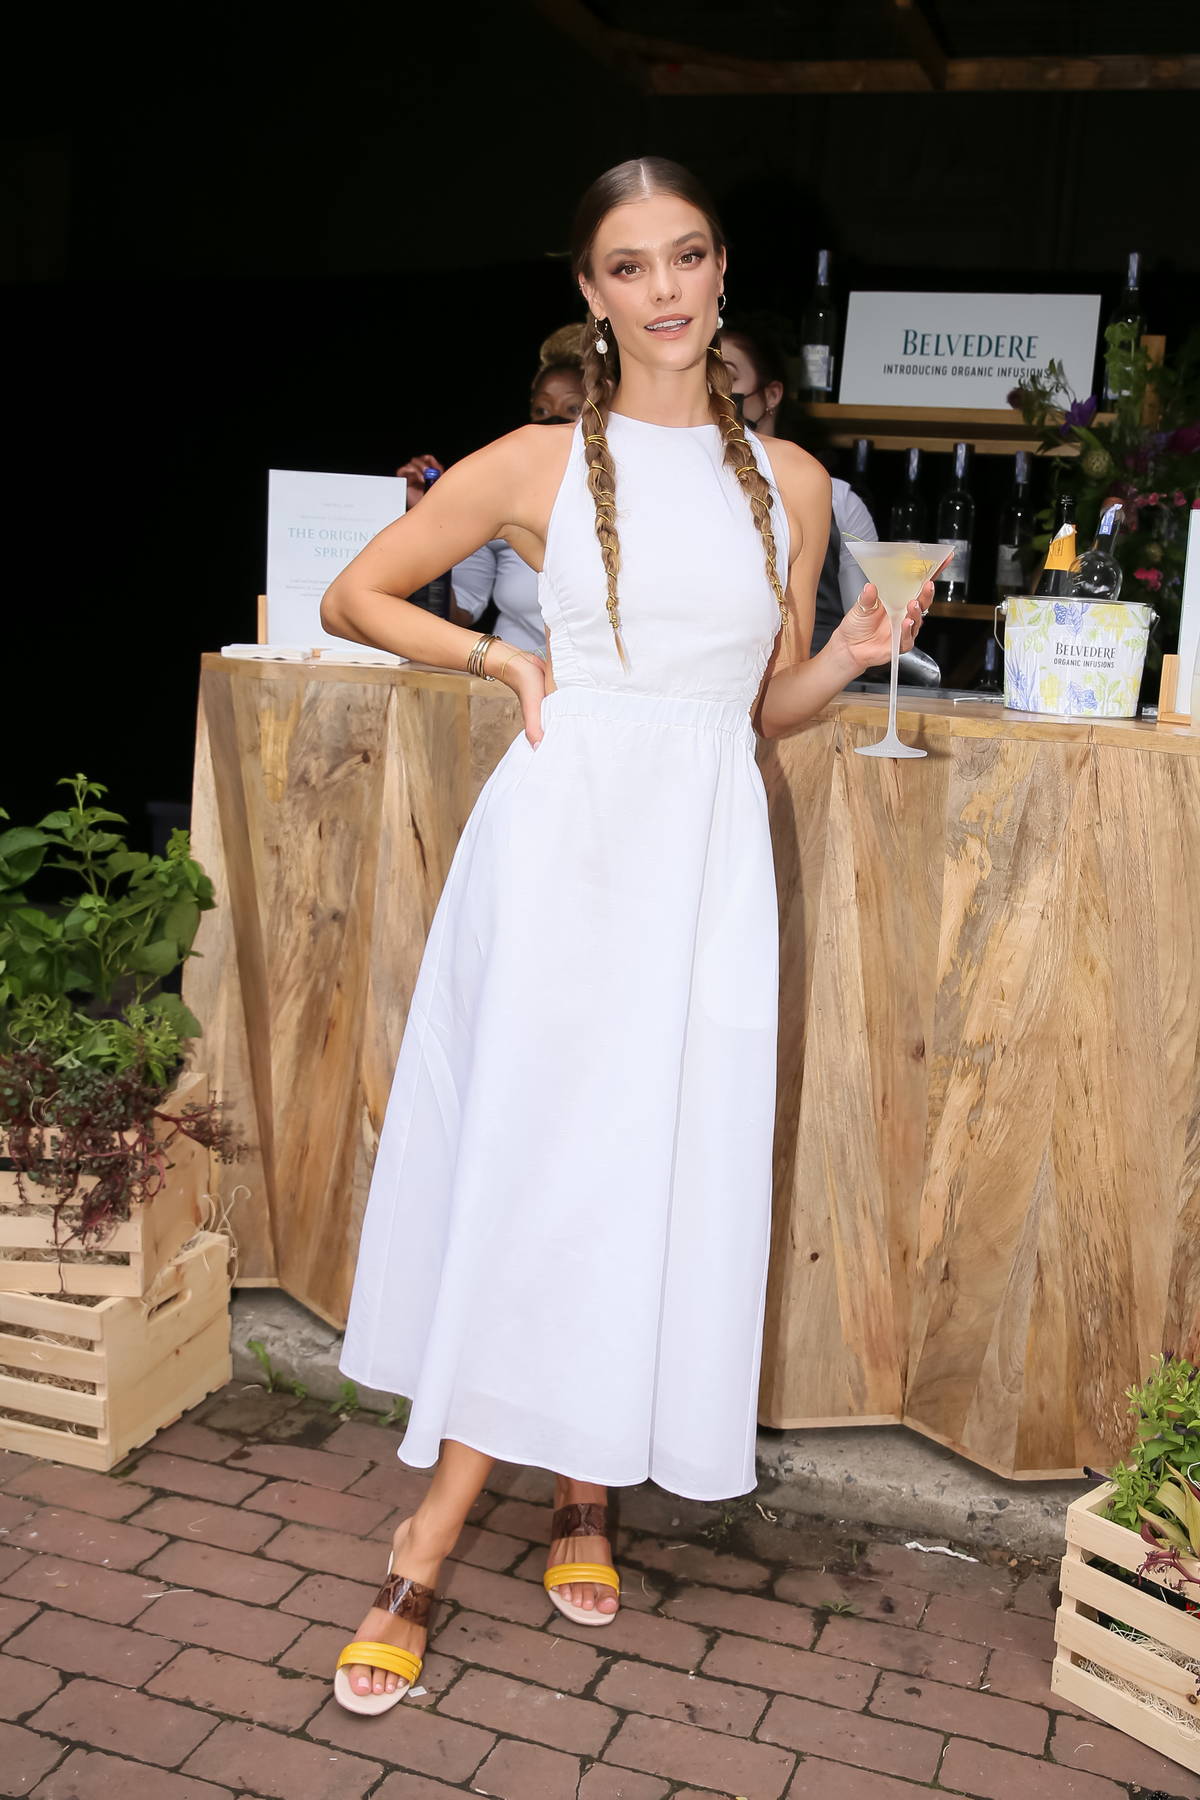 Nina Agdal attends the Belvedere Organic Infusions launch event in New York